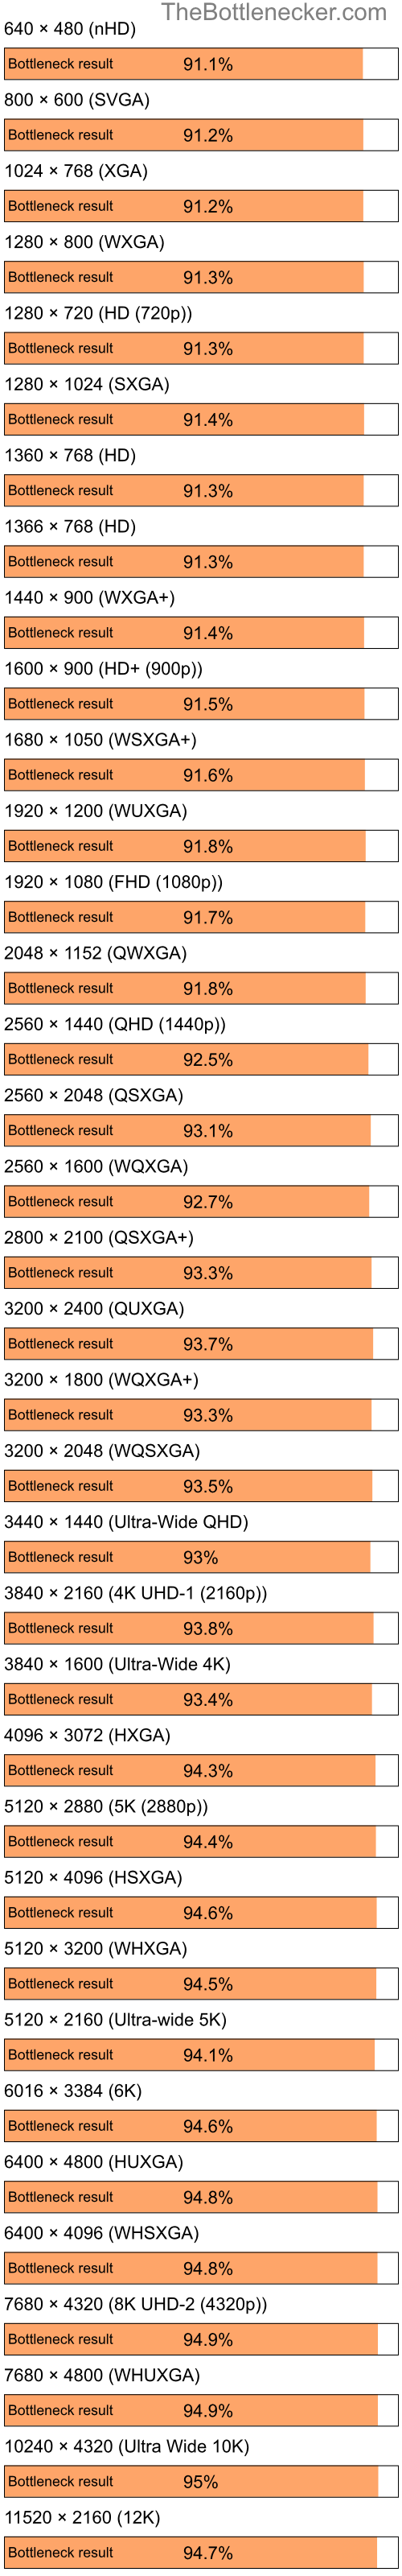 Bottleneck results by resolution for Intel Celeron and NVIDIA GeForce2 MX 200 in7 Days to Die